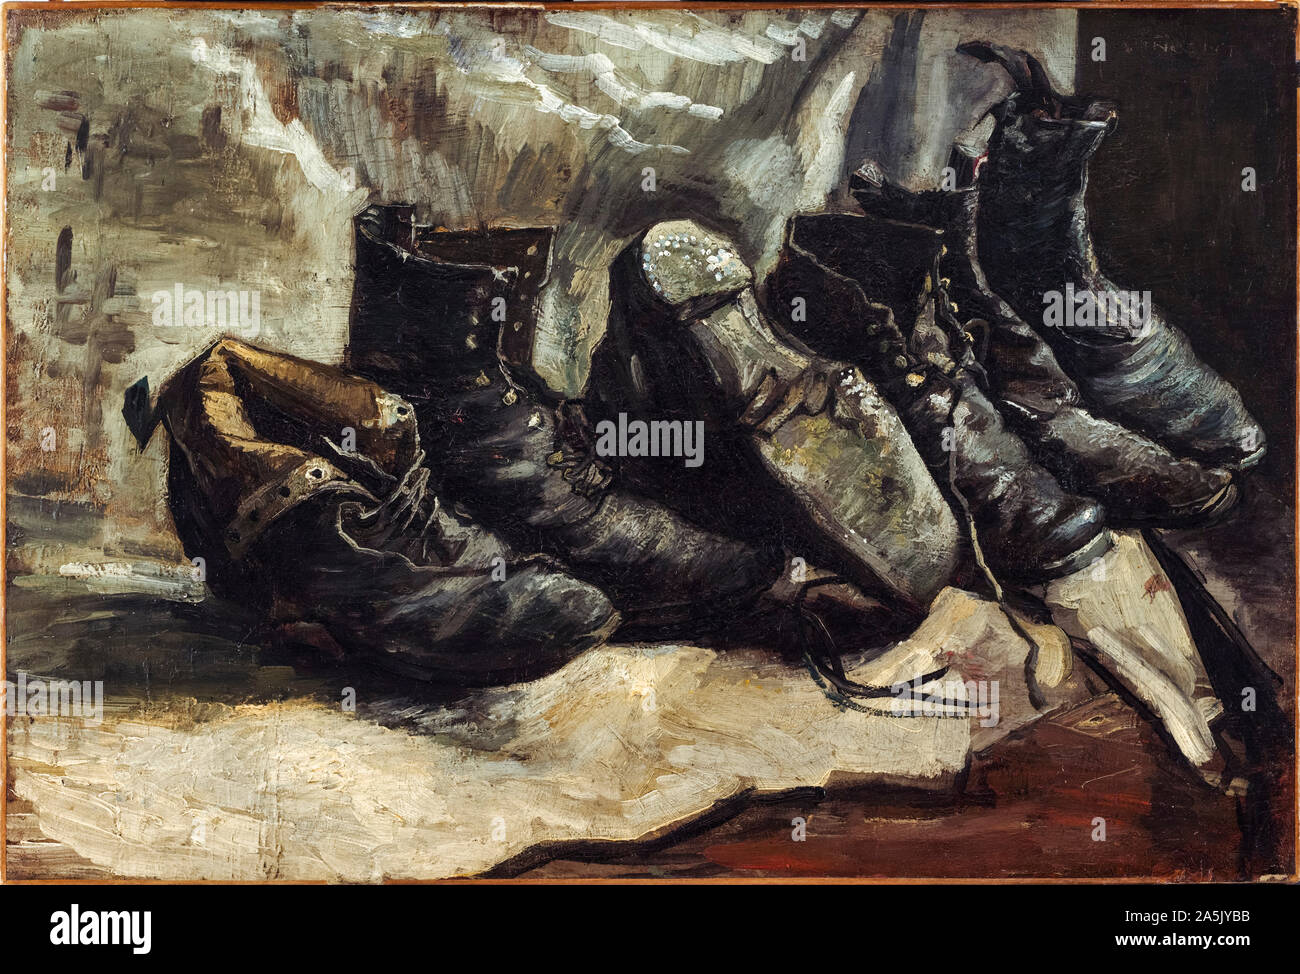 Vincent van Gogh, Three pairs of shoes, still life painting, 1886 Stock Photo